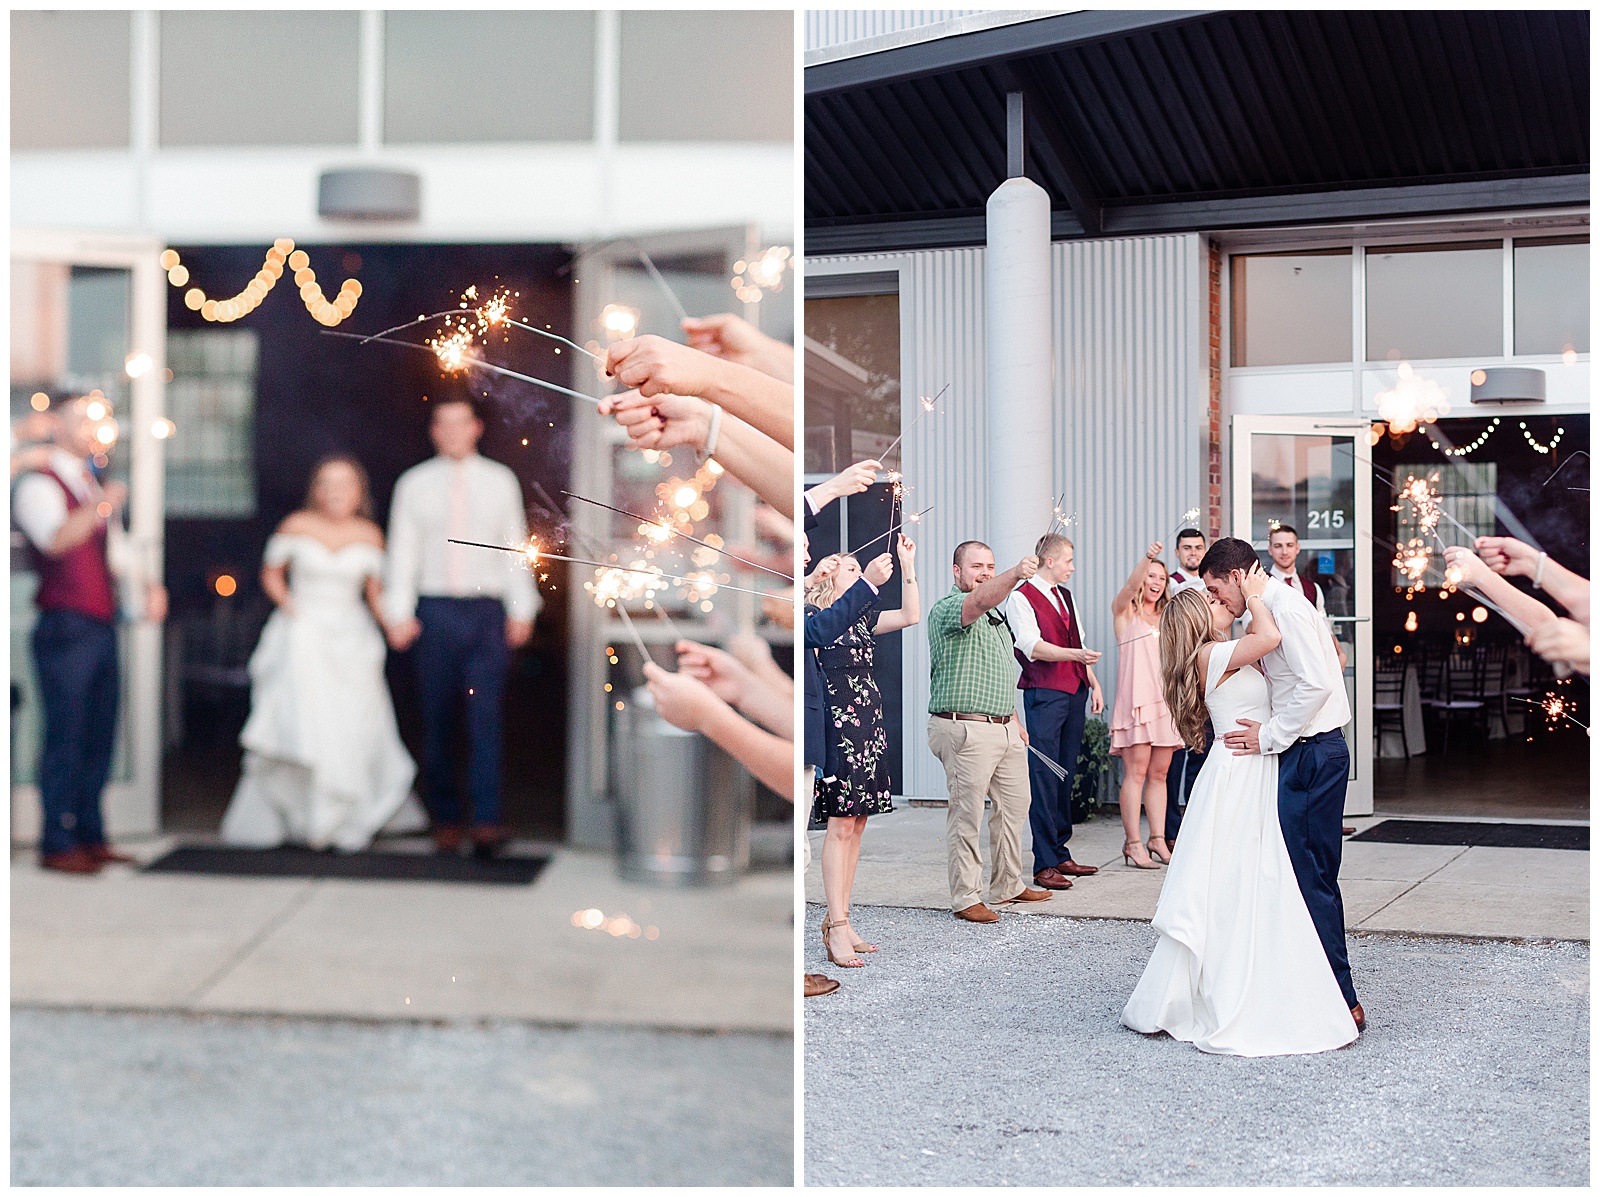 Stunning Modern Bride and Groom sparkler exit from Summer Wedding in Charlotte, NC | Check out the full wedding at KevynDixonPhoto.com